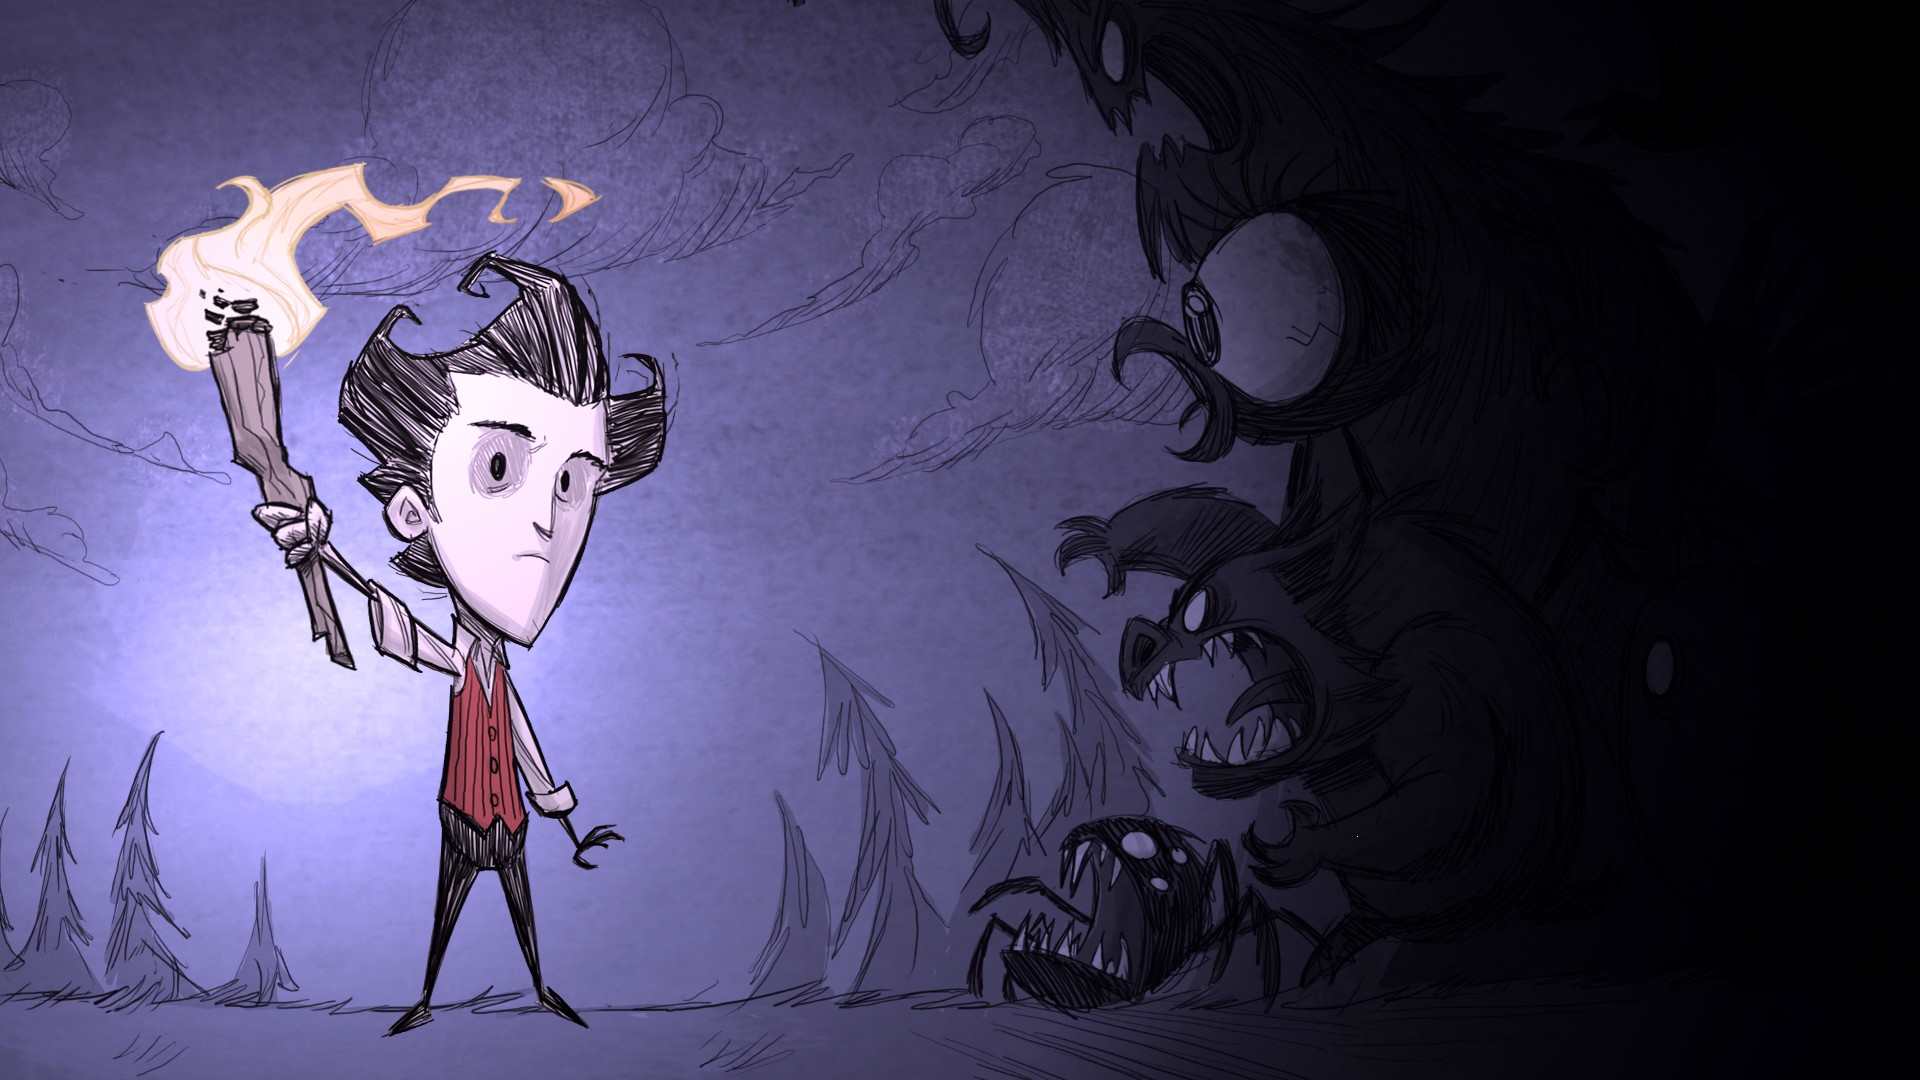 Dont video. Don't Starve together фон. Уилсон don't Starve. ДСТ игра.